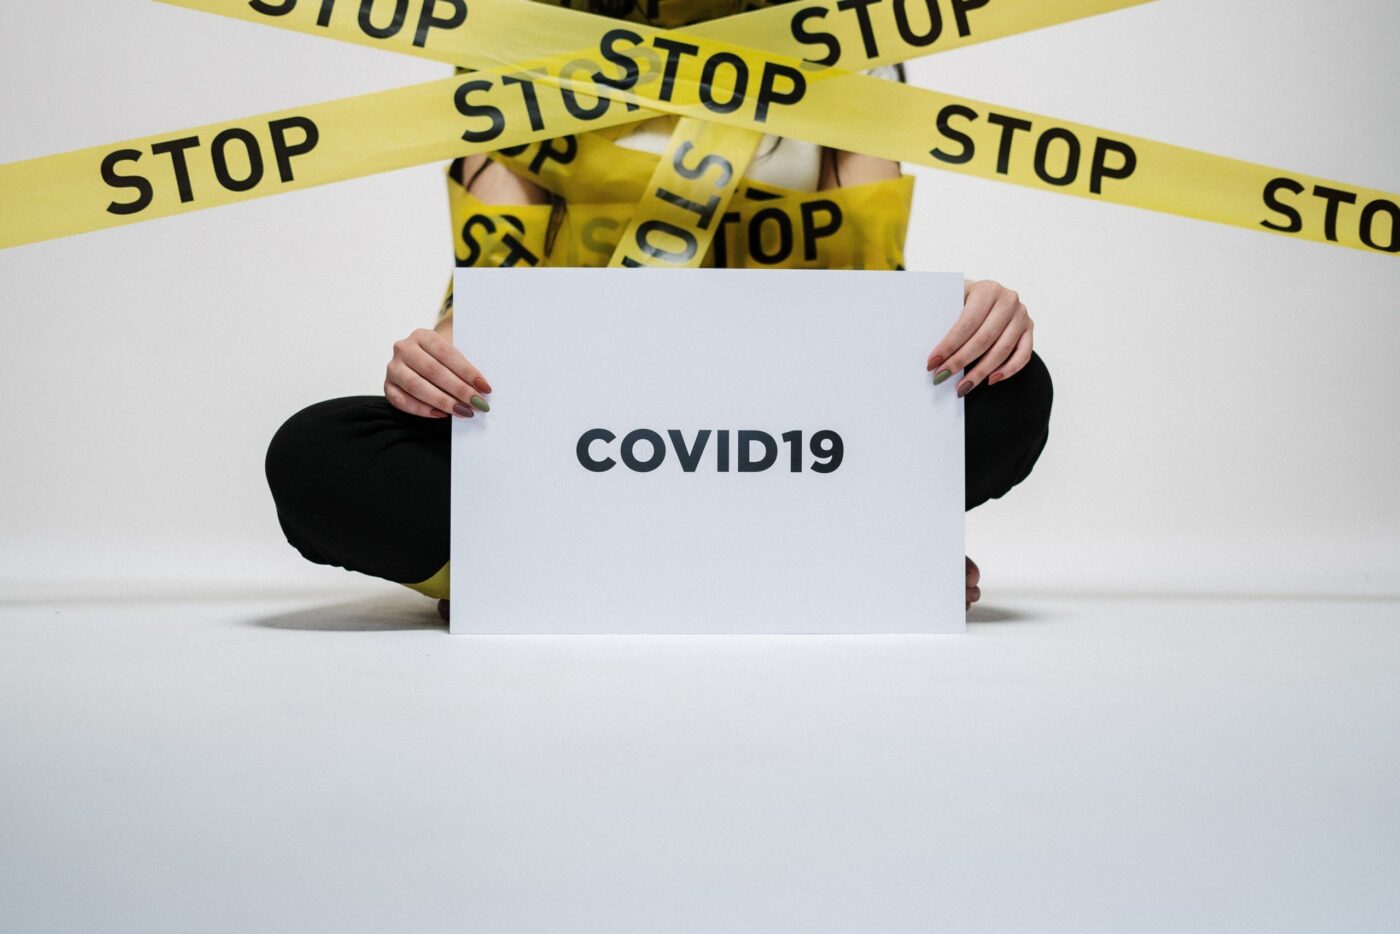 person-holding-covid-sign-3951600